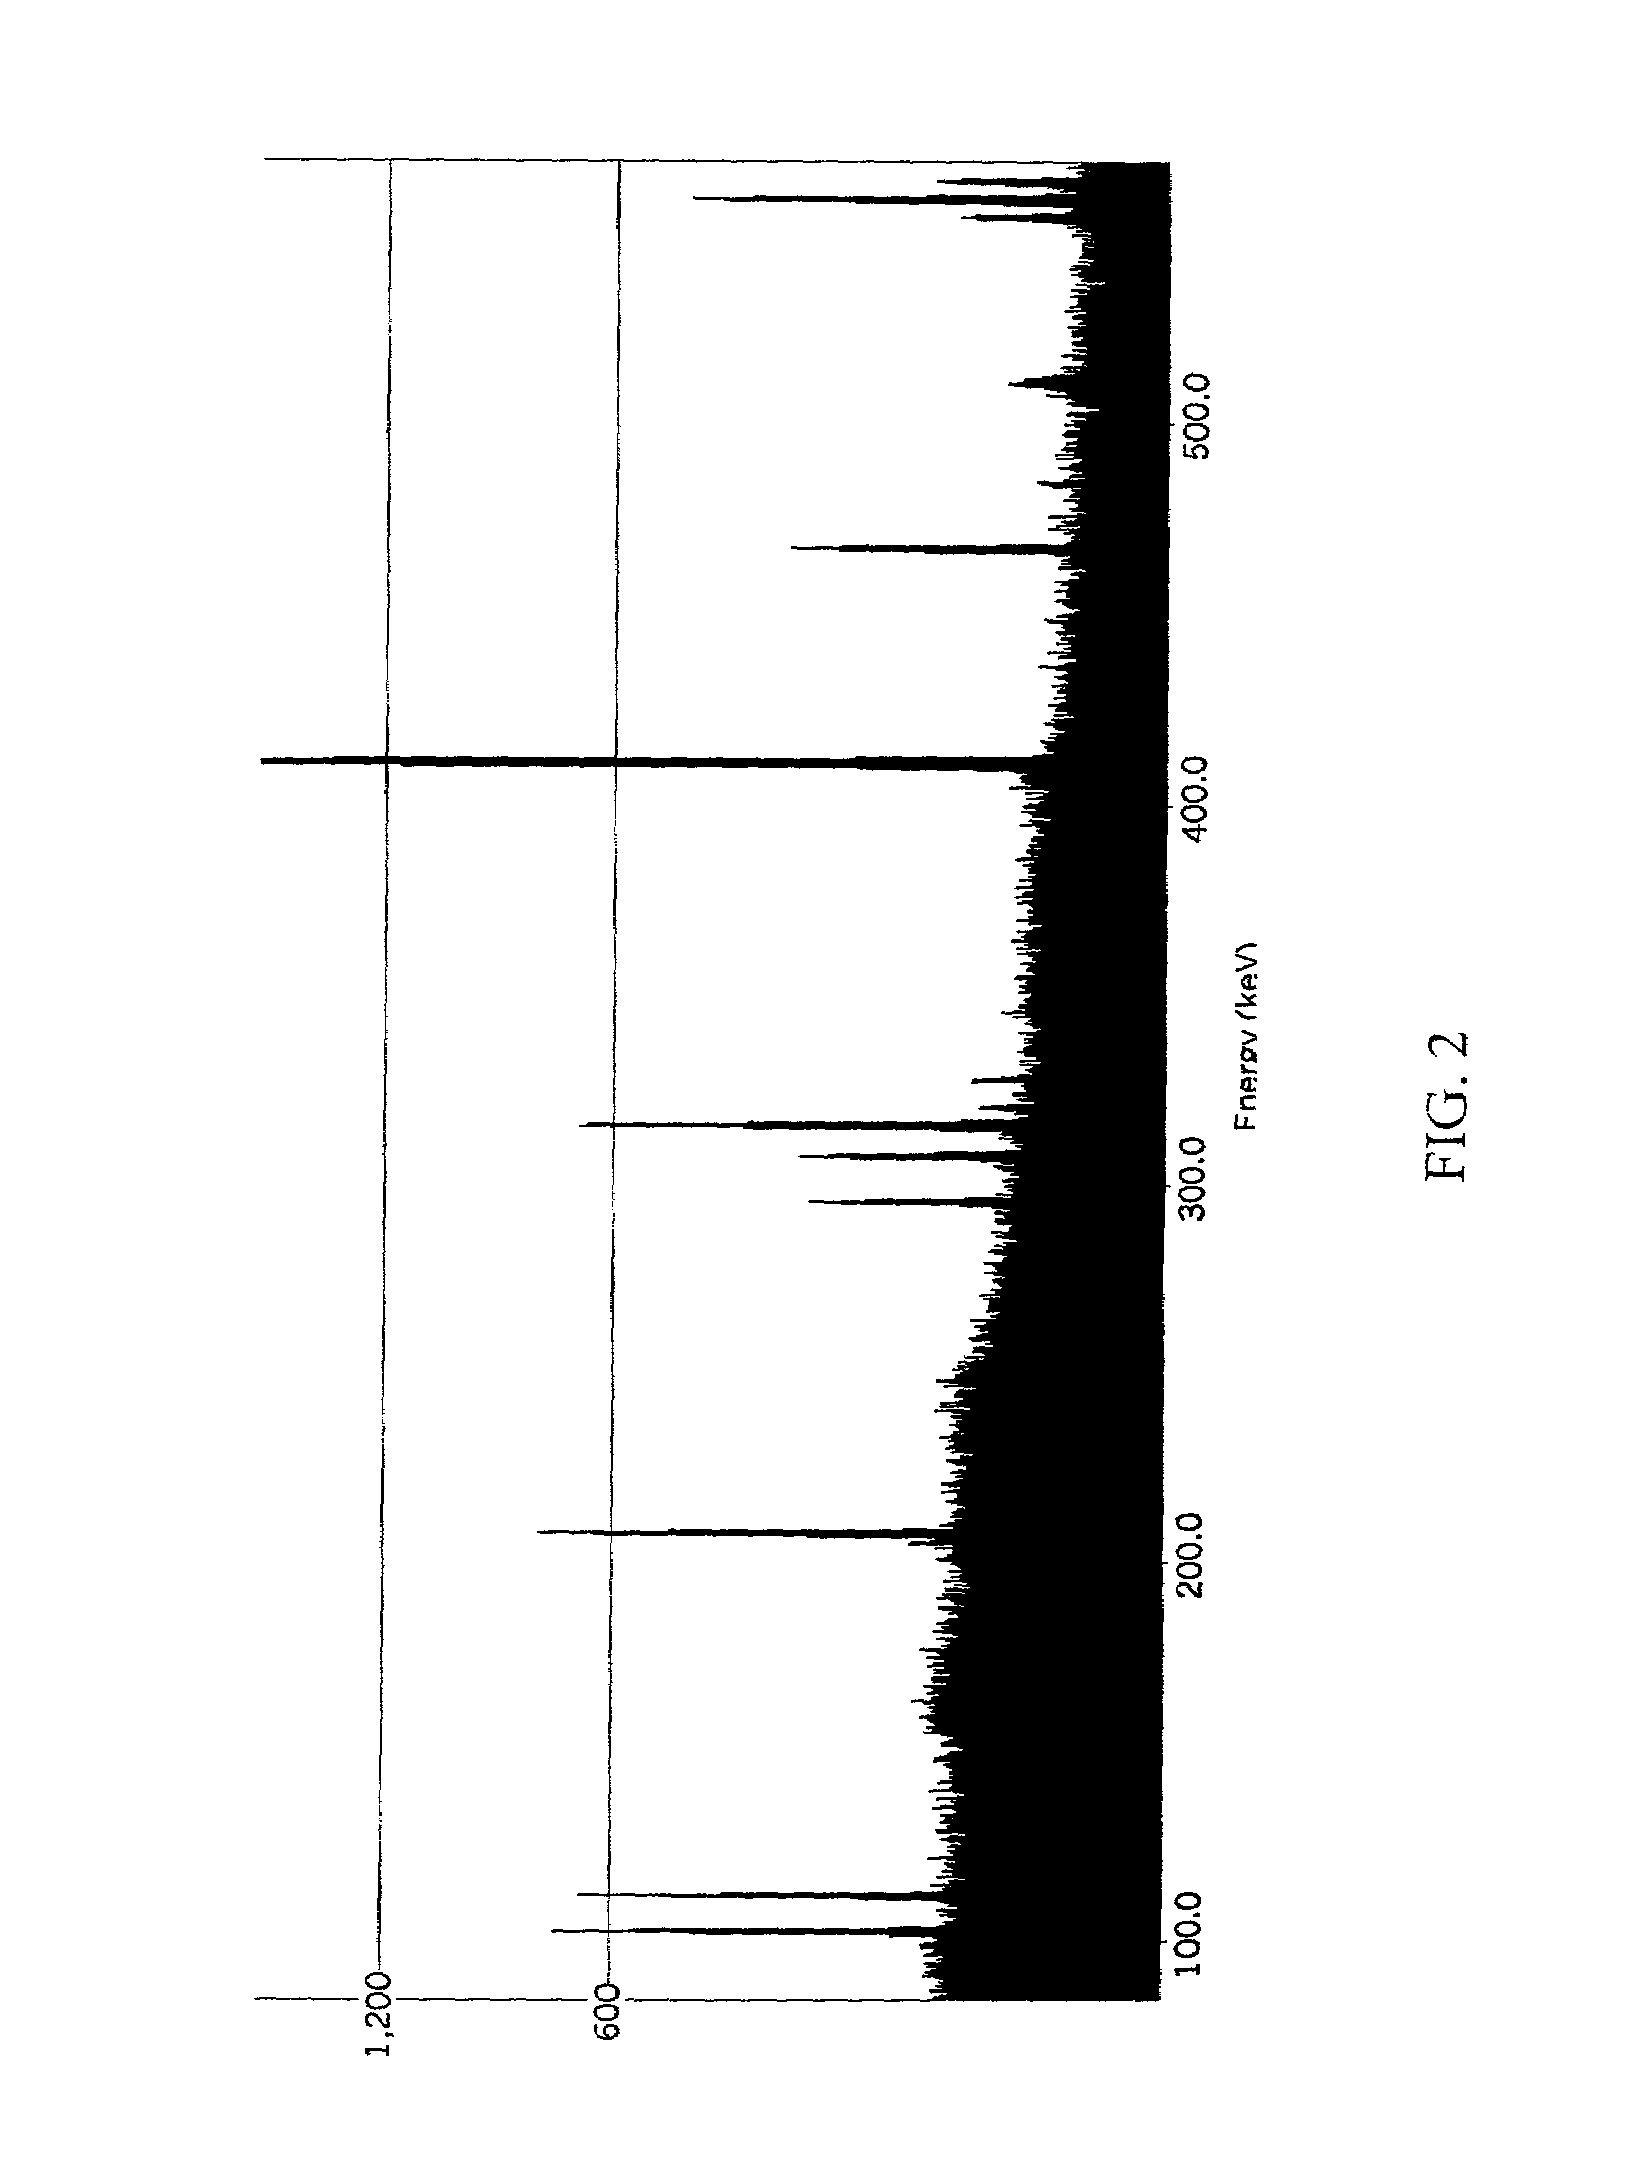 Synthesis, compositions and methods for the measurement of the concentration of stable-isotope labeled compounds in life forms and life form excretory products